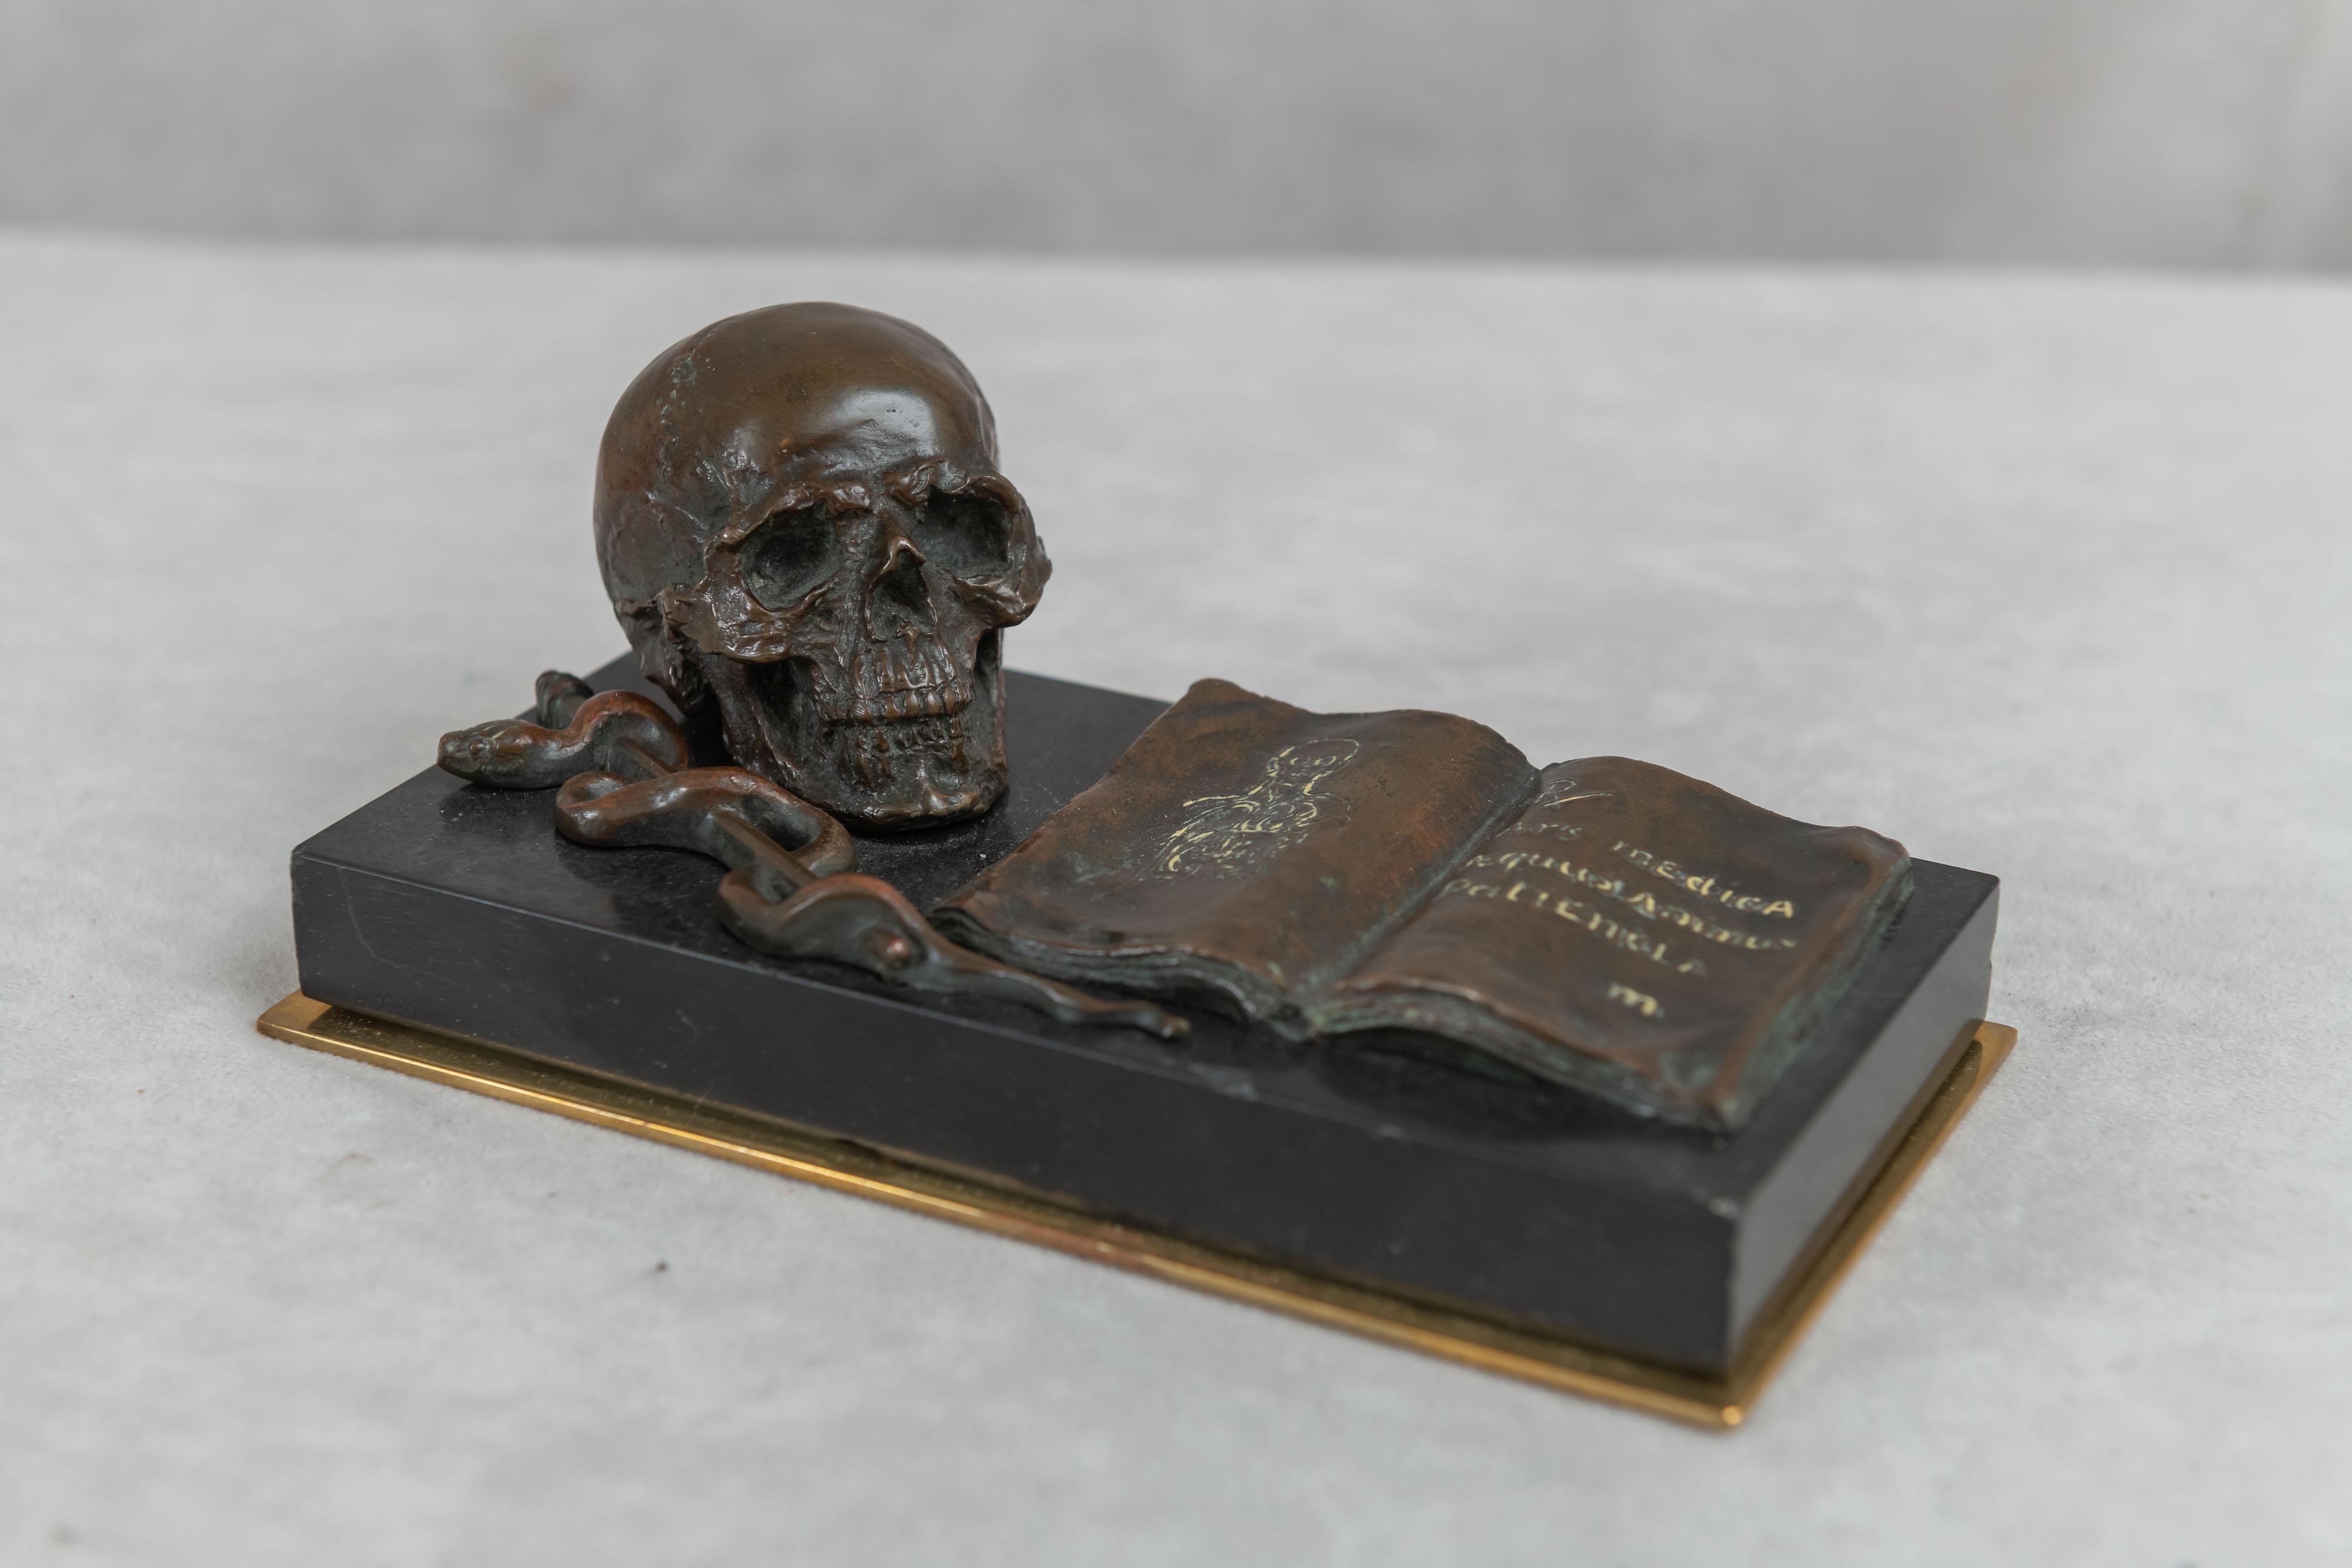 Hand-Crafted Medical Themed Bronze Desk Item, Skull, Caduceus, and Medical Book ca. 1900